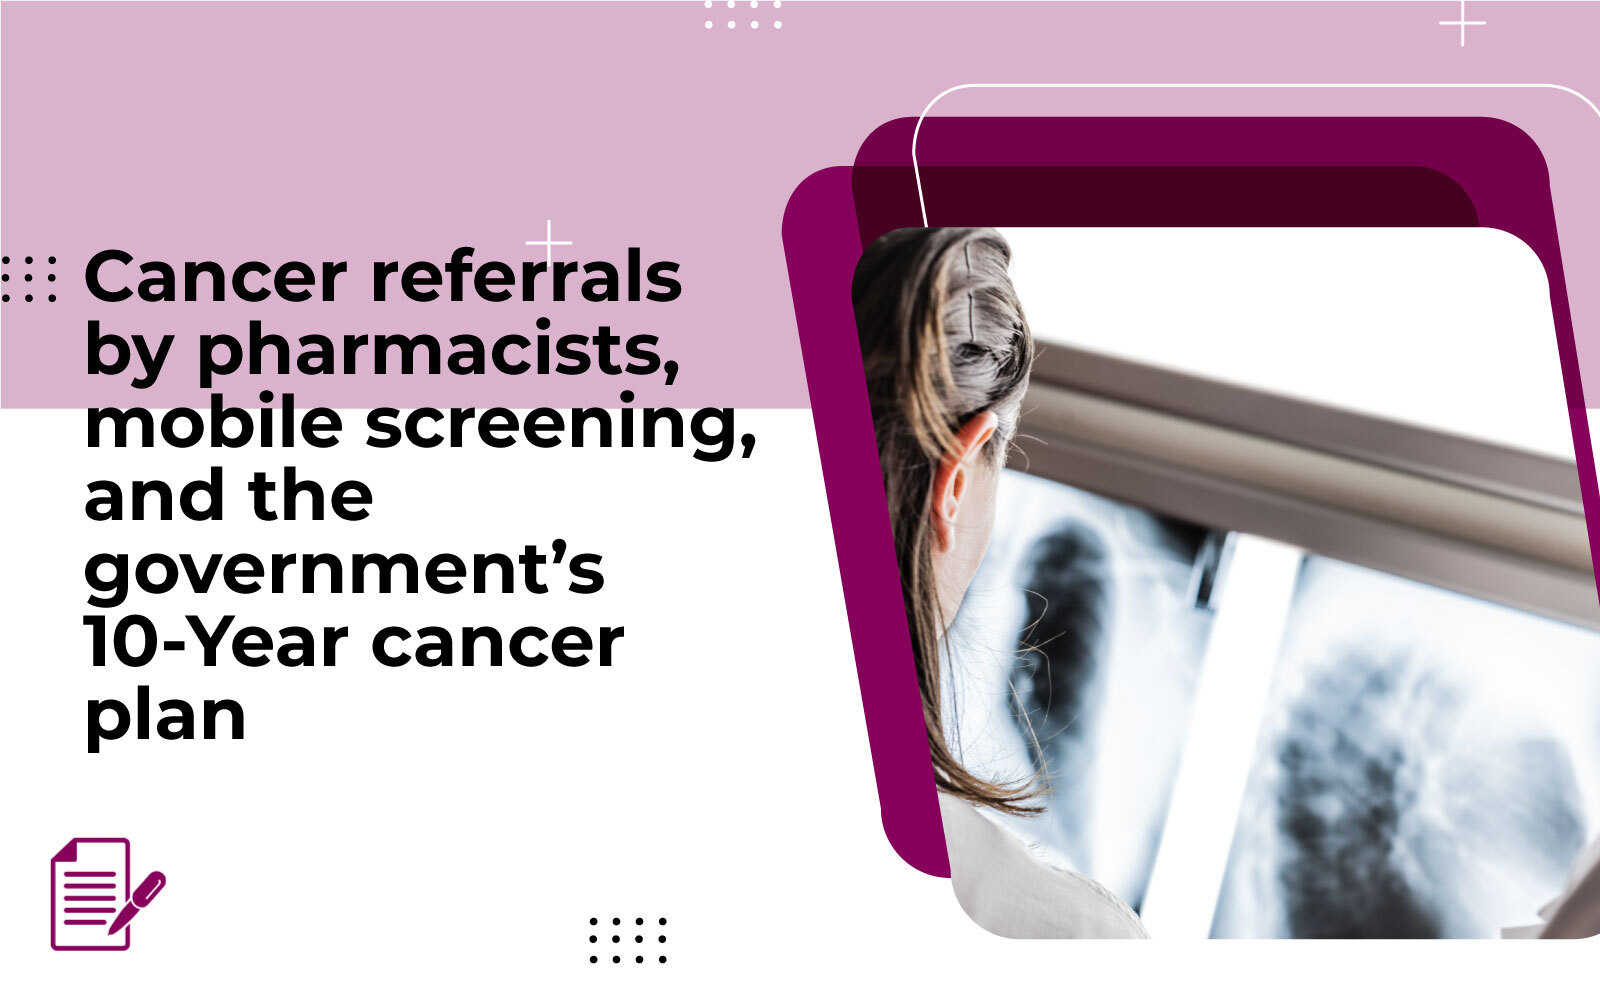 Cancer referrals by pharmacists, mobile screening, and the governments 10-Year cancer plan